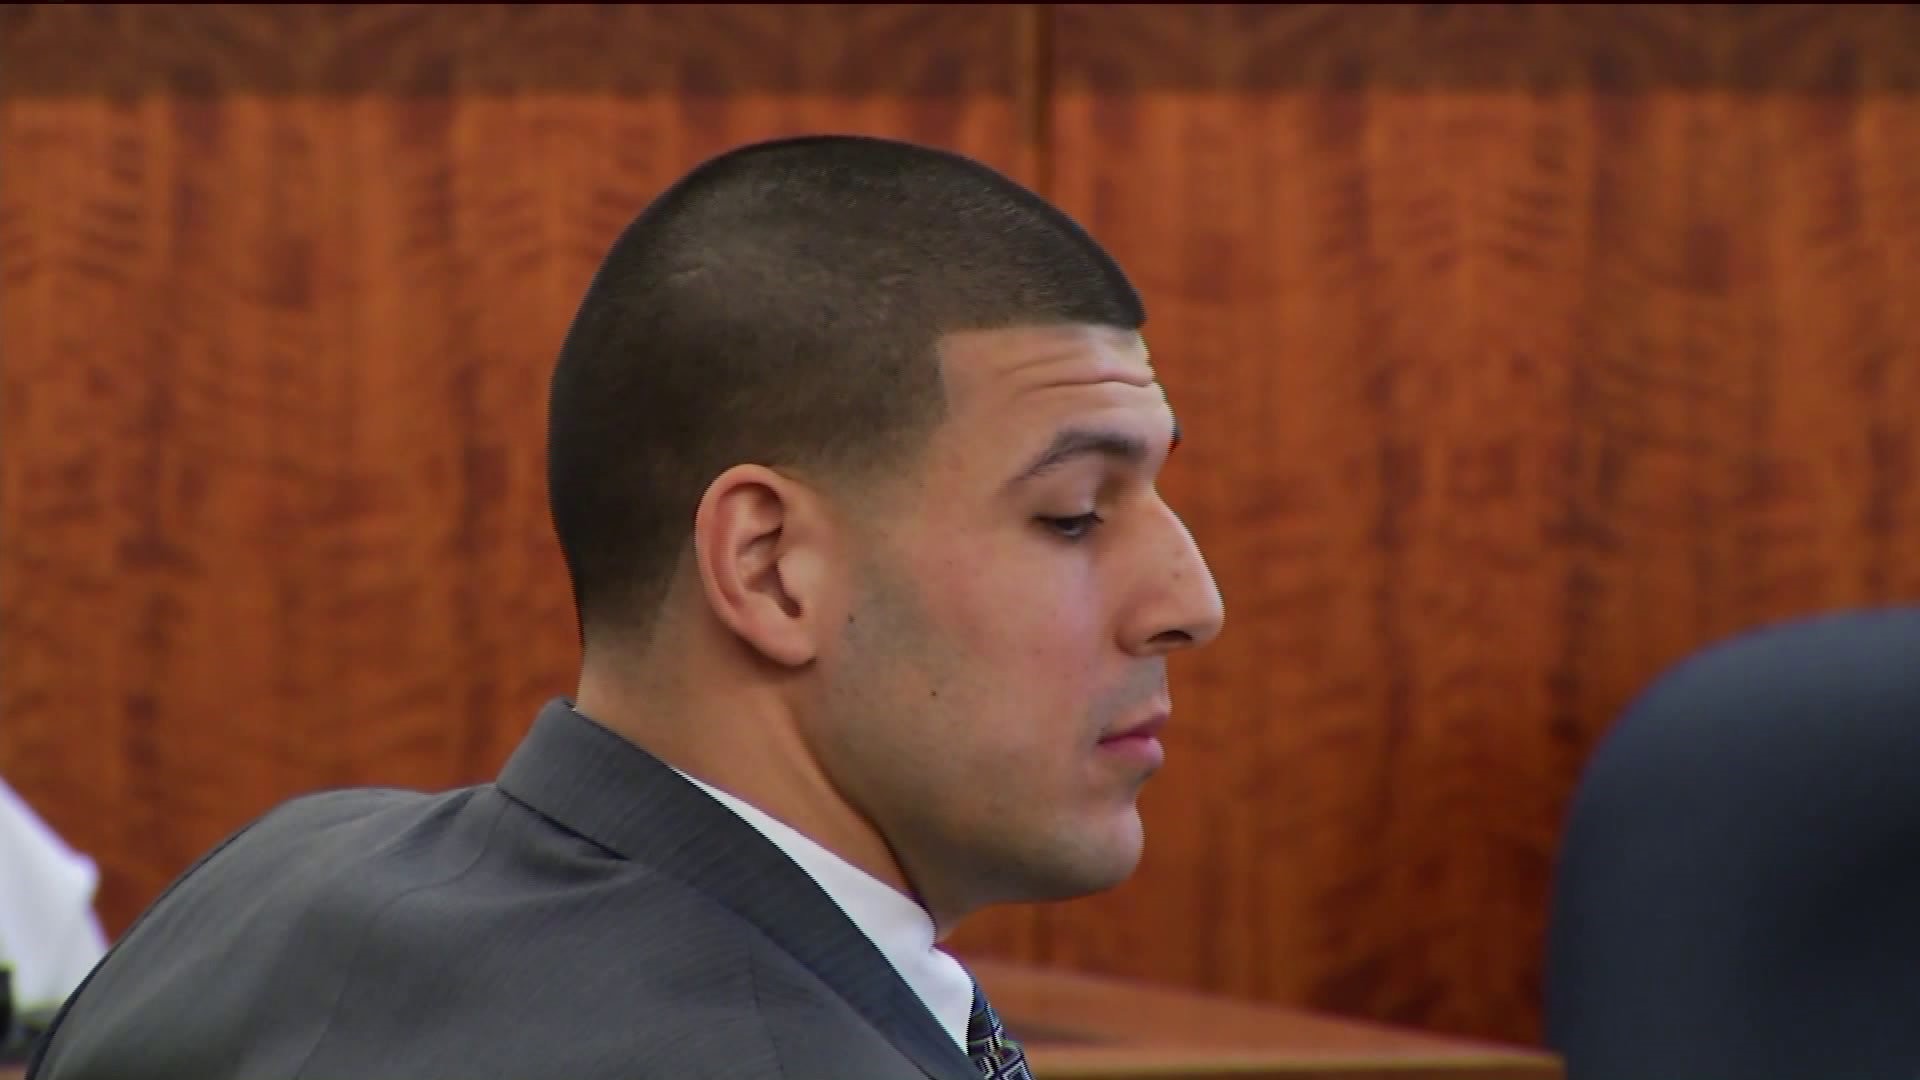 Aaron Hernandez, already serving life sentence for 2013 murder, is acquitted in 2012 double slaying